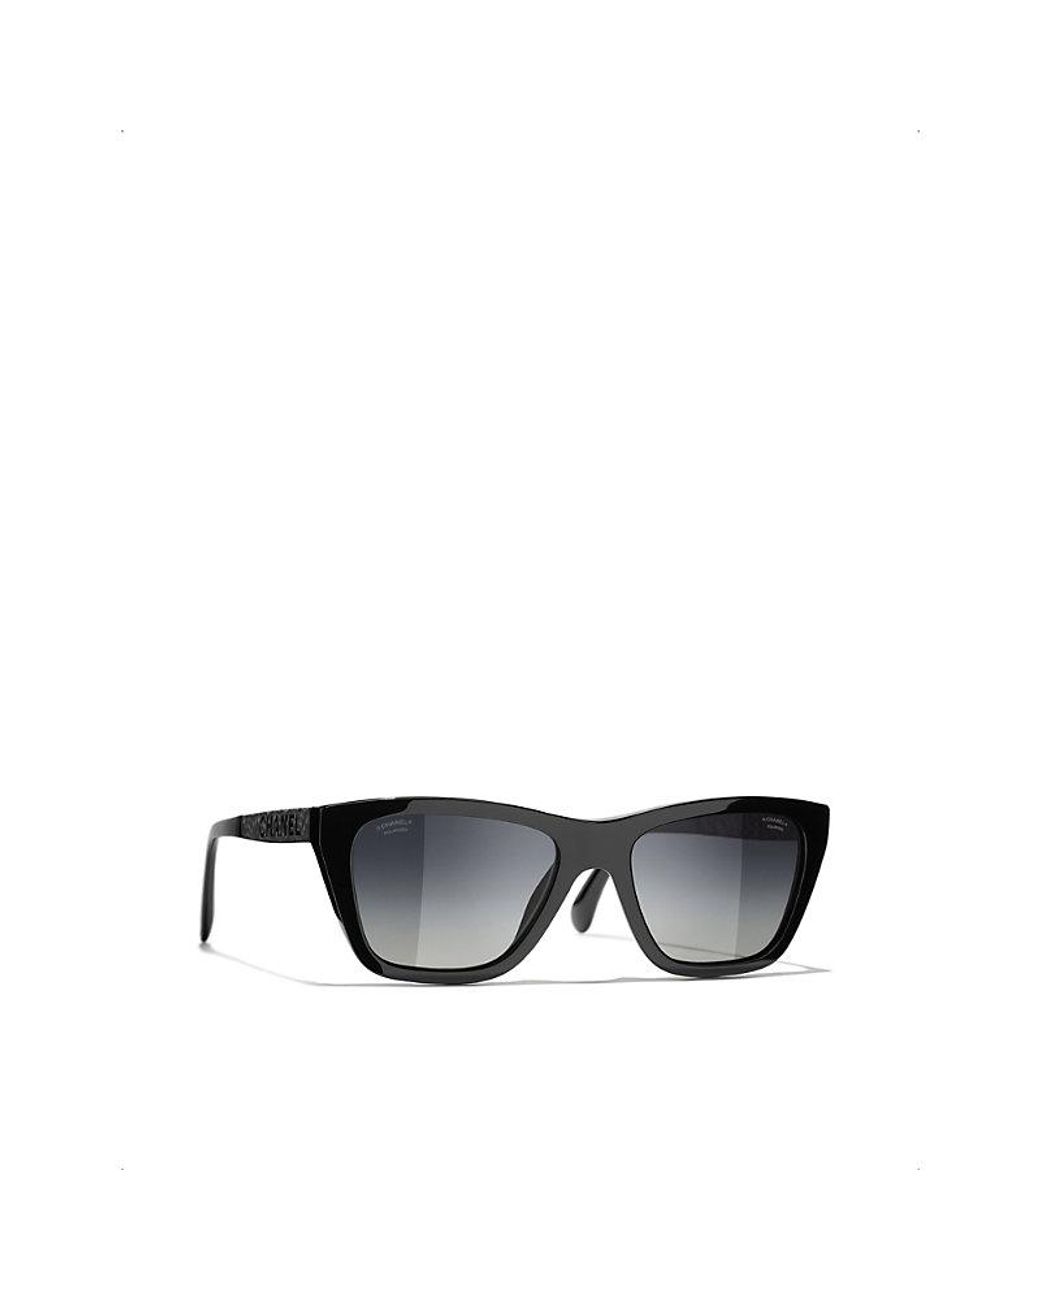 Chanel Rectangle Glasses in Black | Lyst